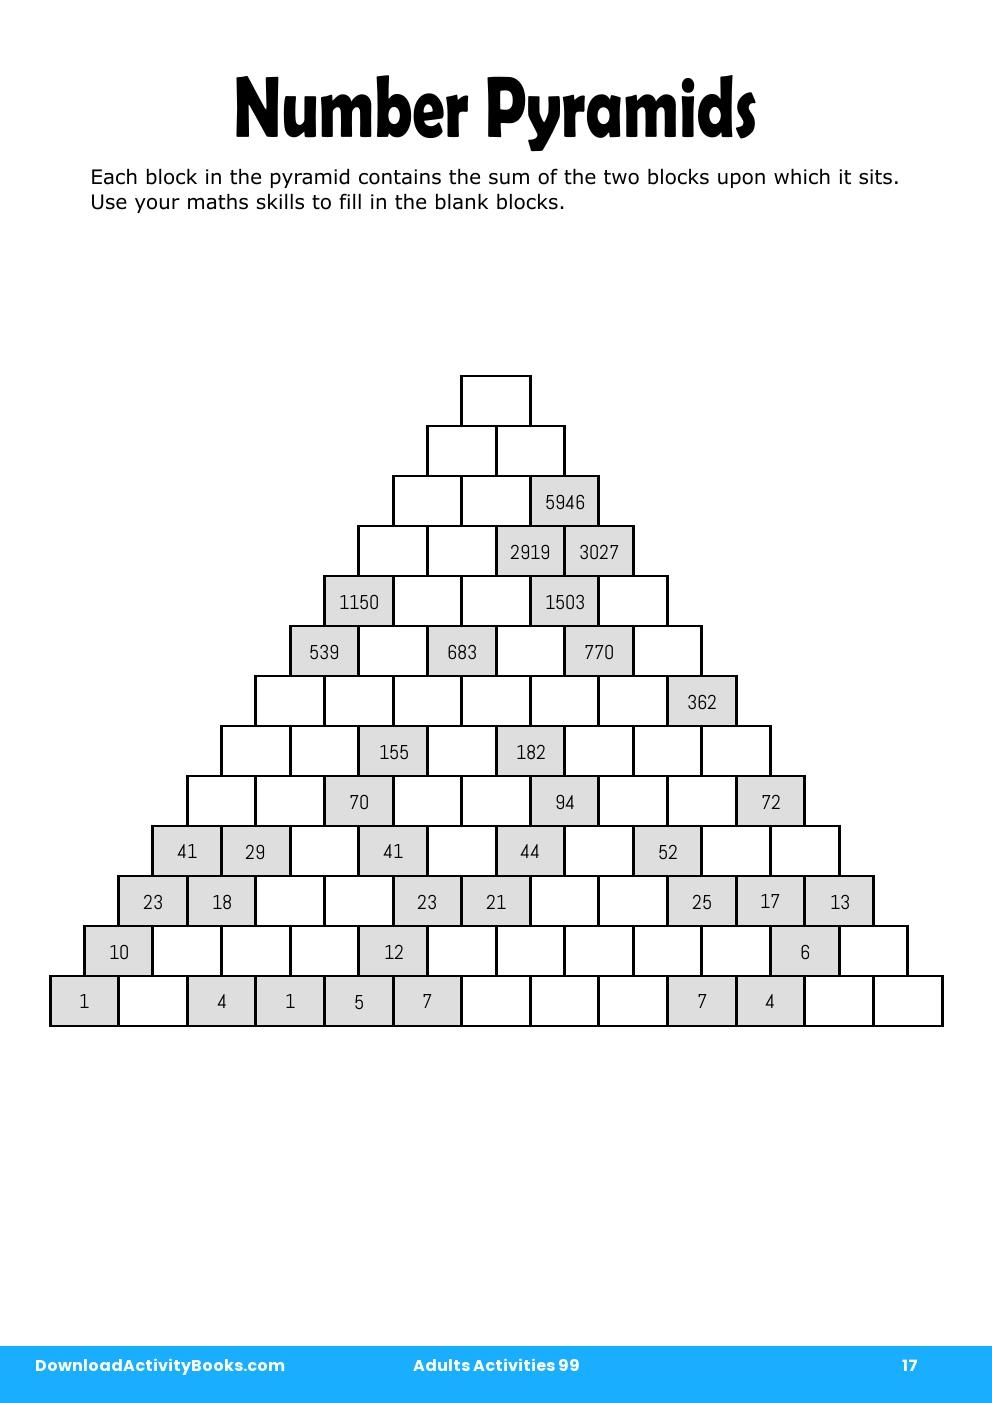 Number Pyramids in Adults Activities 99